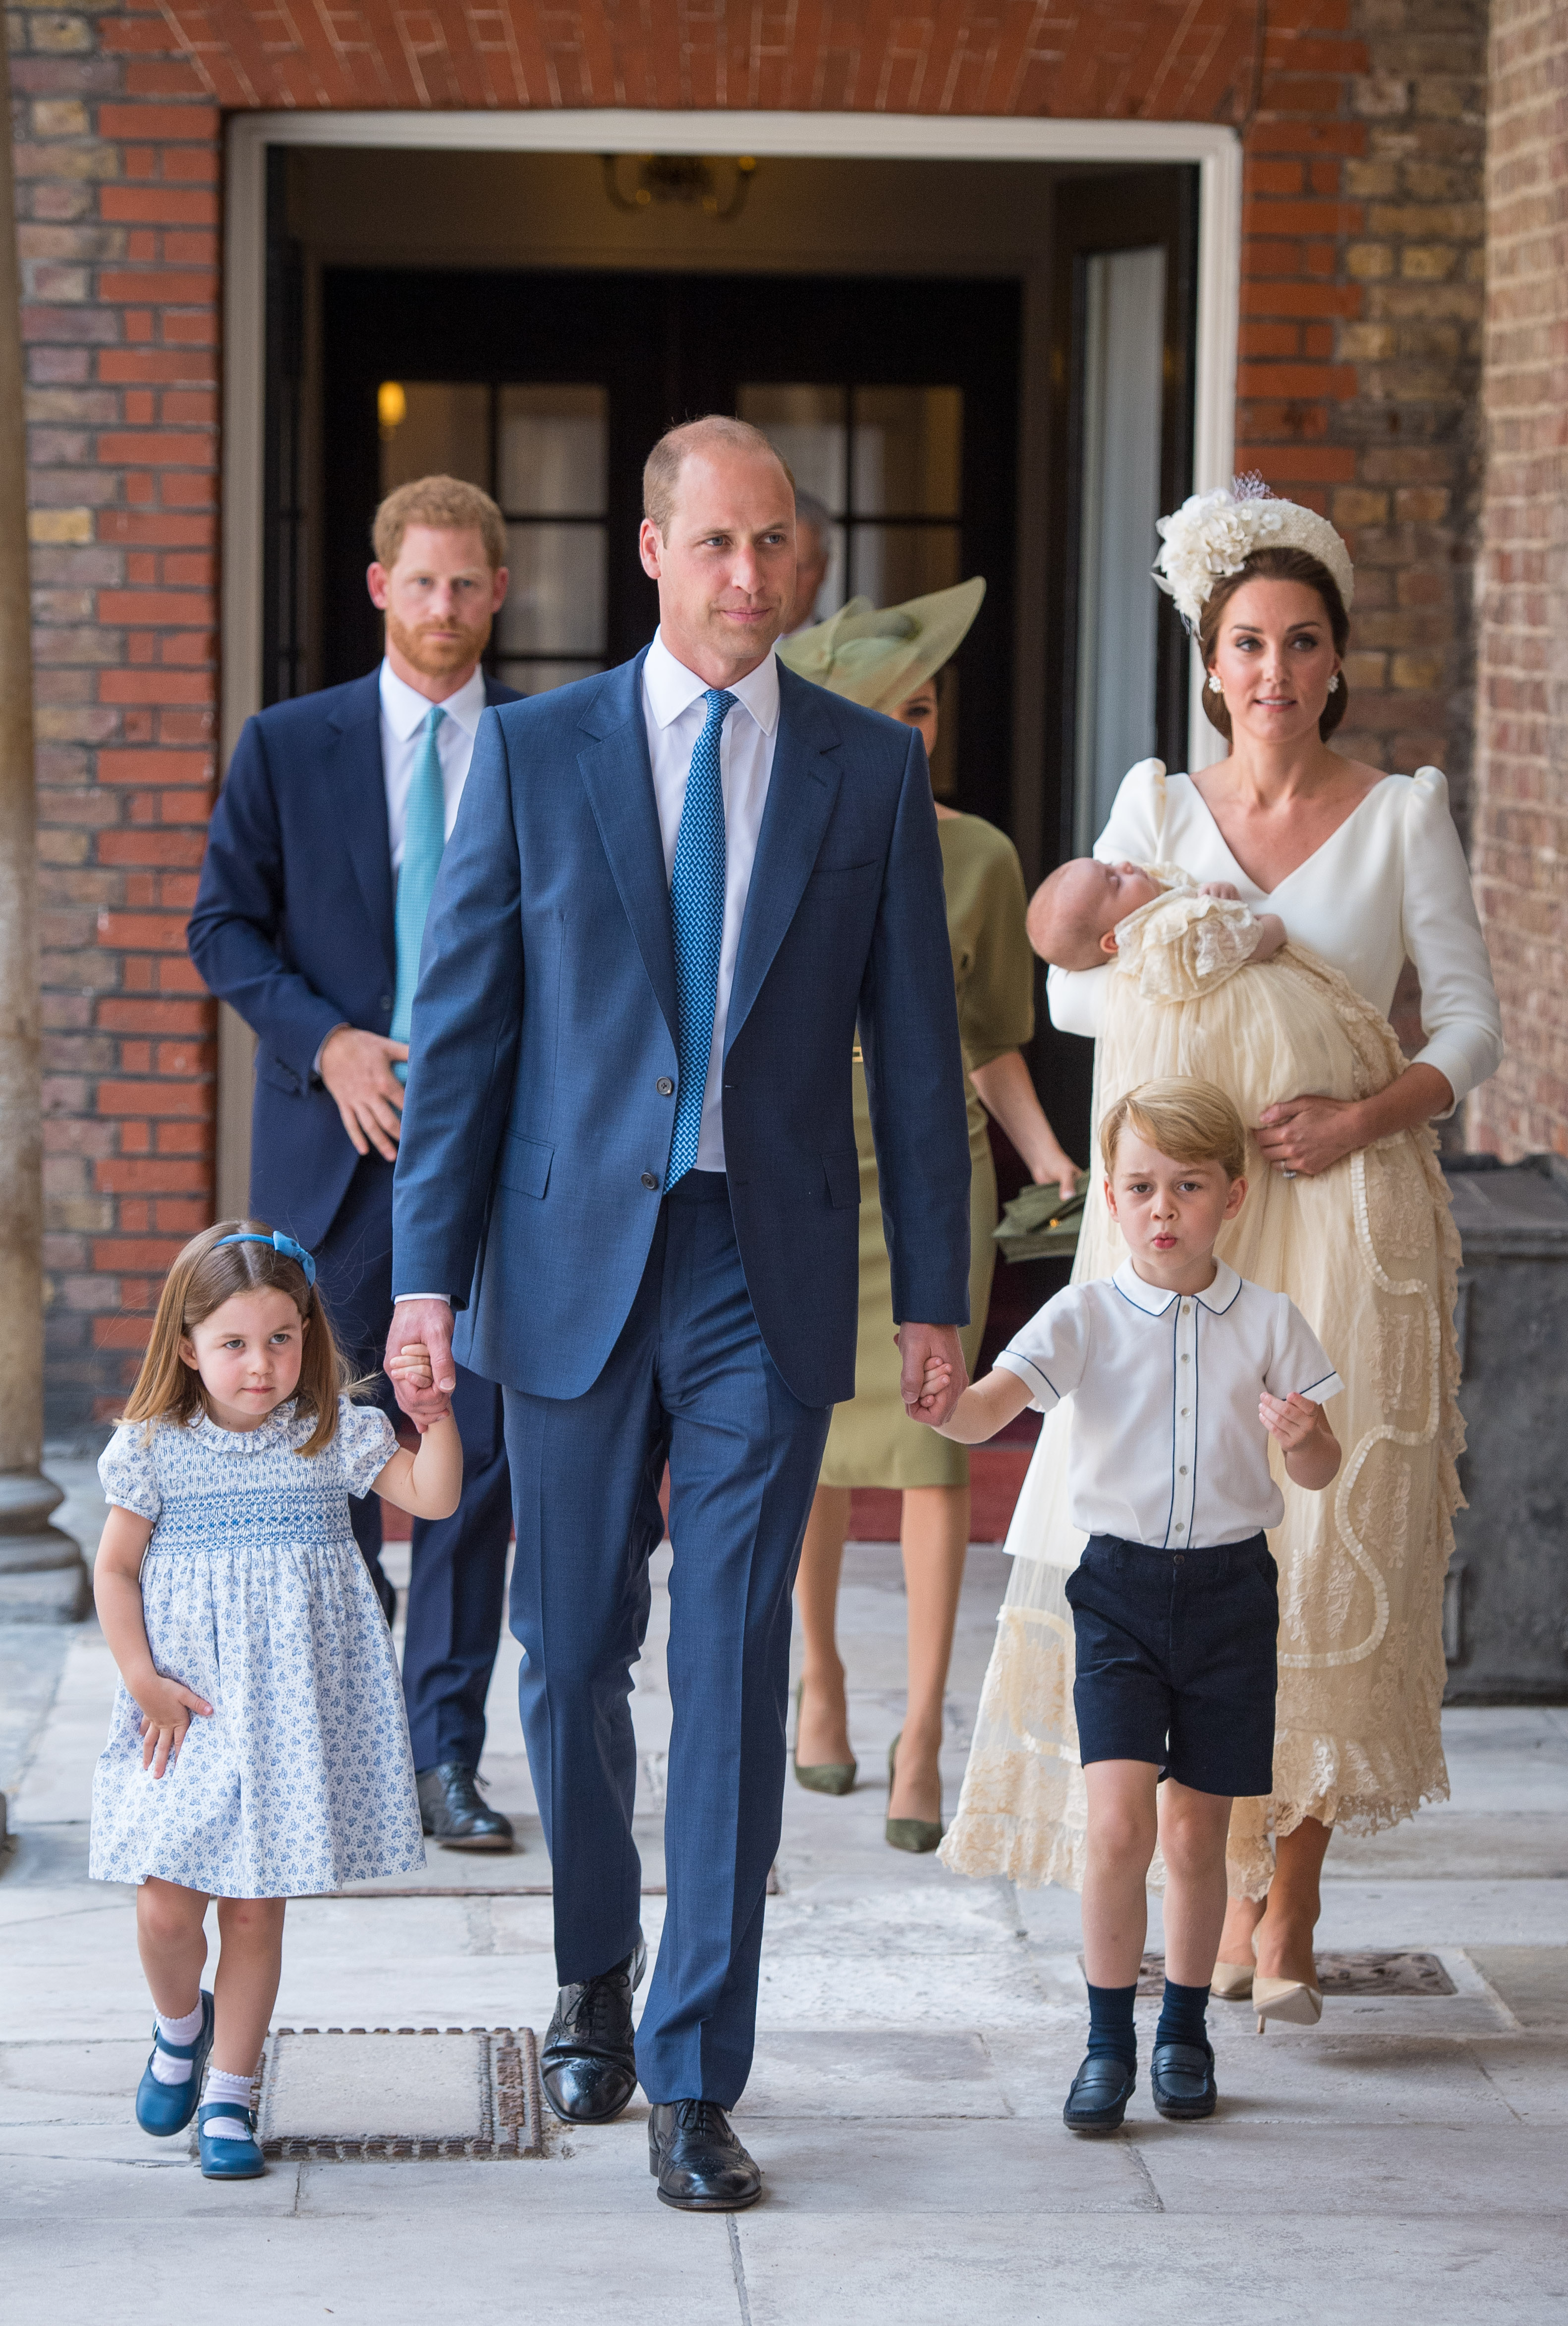 LONDON, ENGLAND - JULY 09: Princess Charlotte and Prince George hold the hands of their father, Prince William, Duke of Cambridge, as they arrive at the Chapel Royal, St James's Palace, London for the christening of their brother, Prince Louis, who is being carried by their mother, Catherine, Duchess of Cambridge on July 09, 2018 in London, England. (Photo by Dominic Lipinski - WPA Pool/Getty Images)